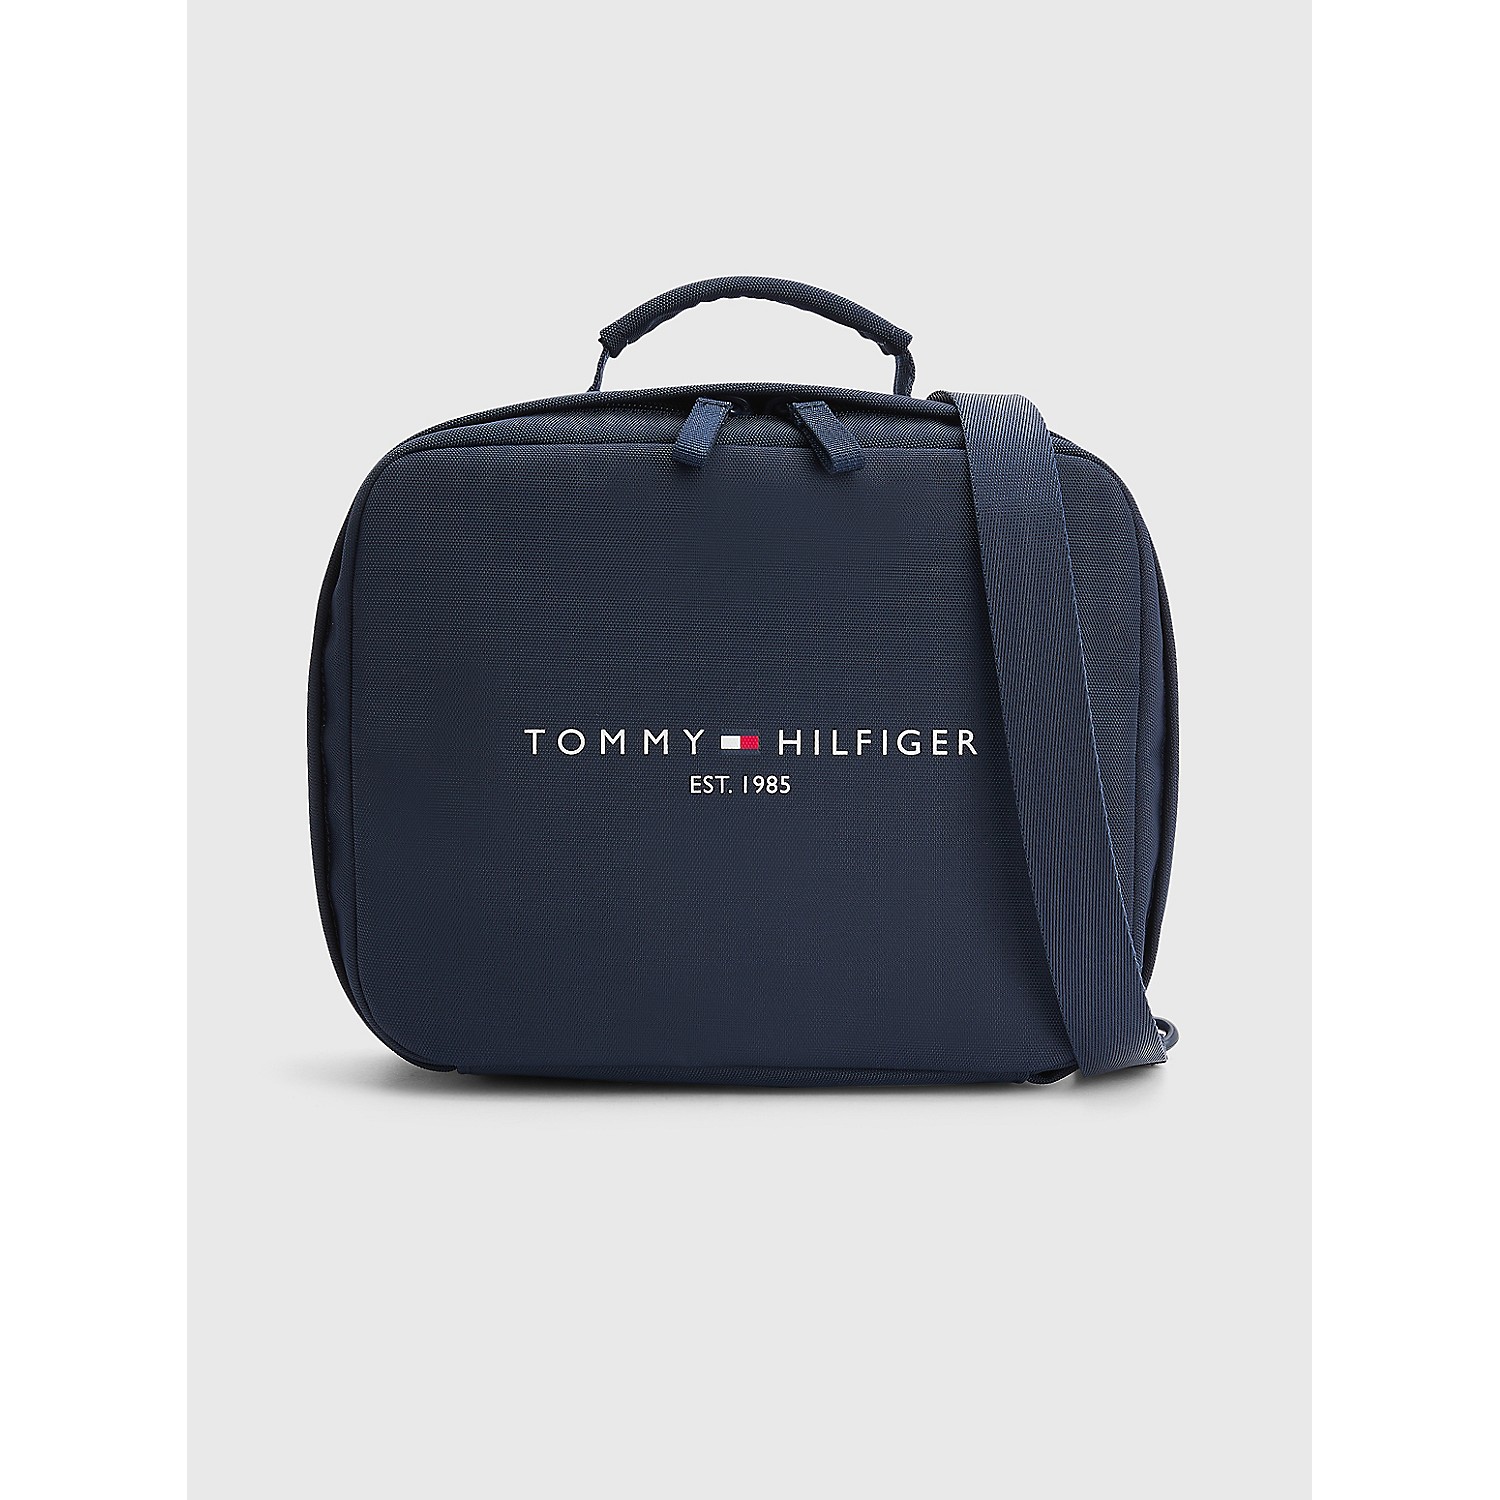 TOMMY HILFIGER Kids Classic Lunch Box